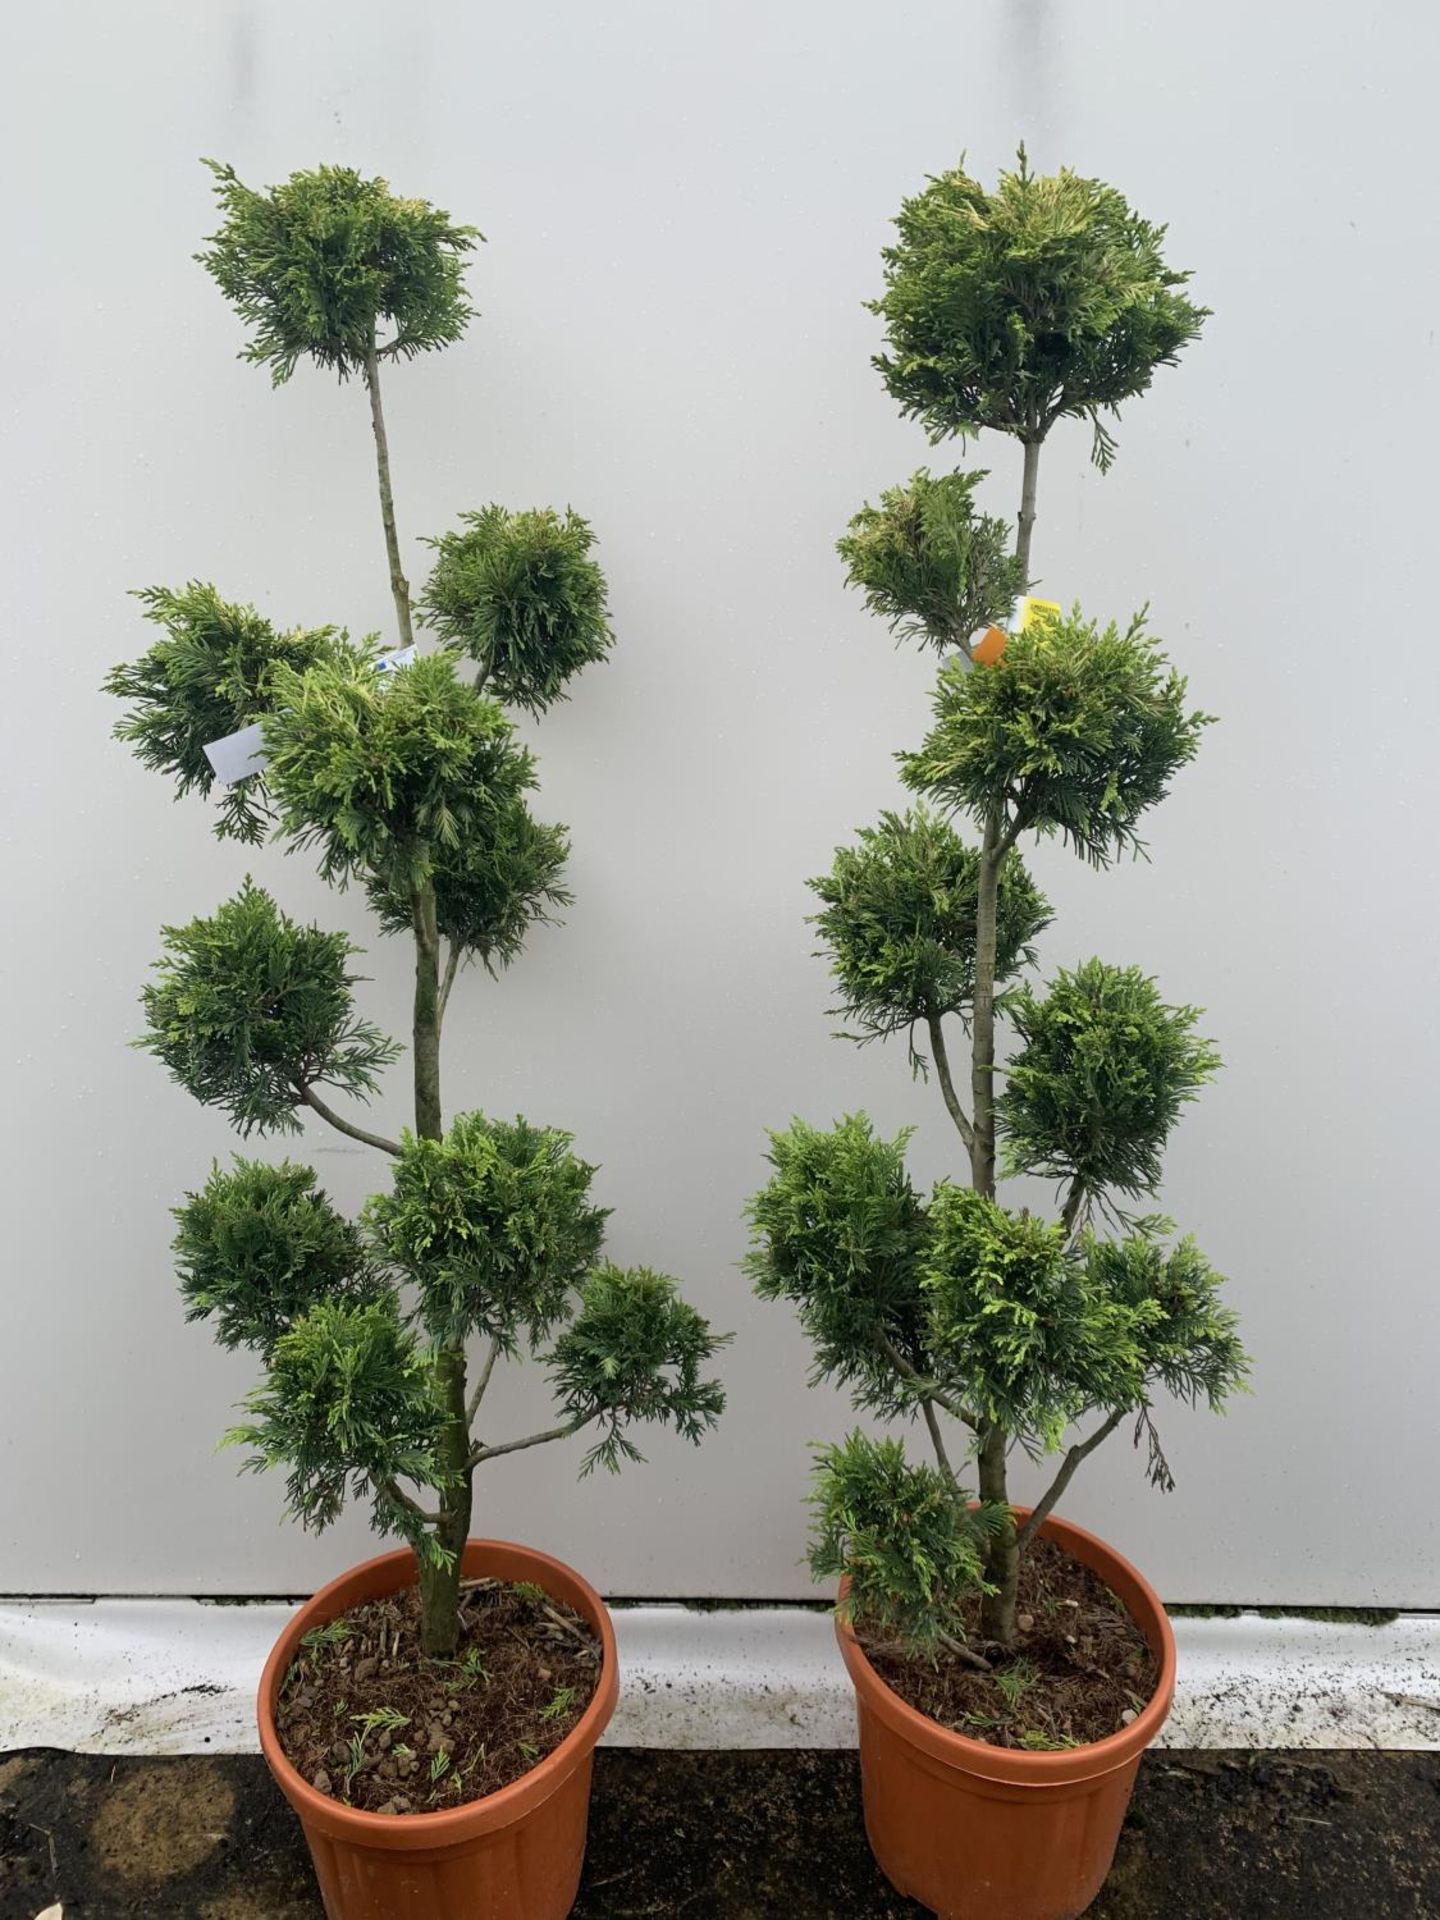 TWO POM POM TREES CUPRESSOCYPARIS LEYLANDII 'GOLD RIDER' APPROX 150CM IN HEIGHT IN 15 LTR POTS - Image 4 of 6